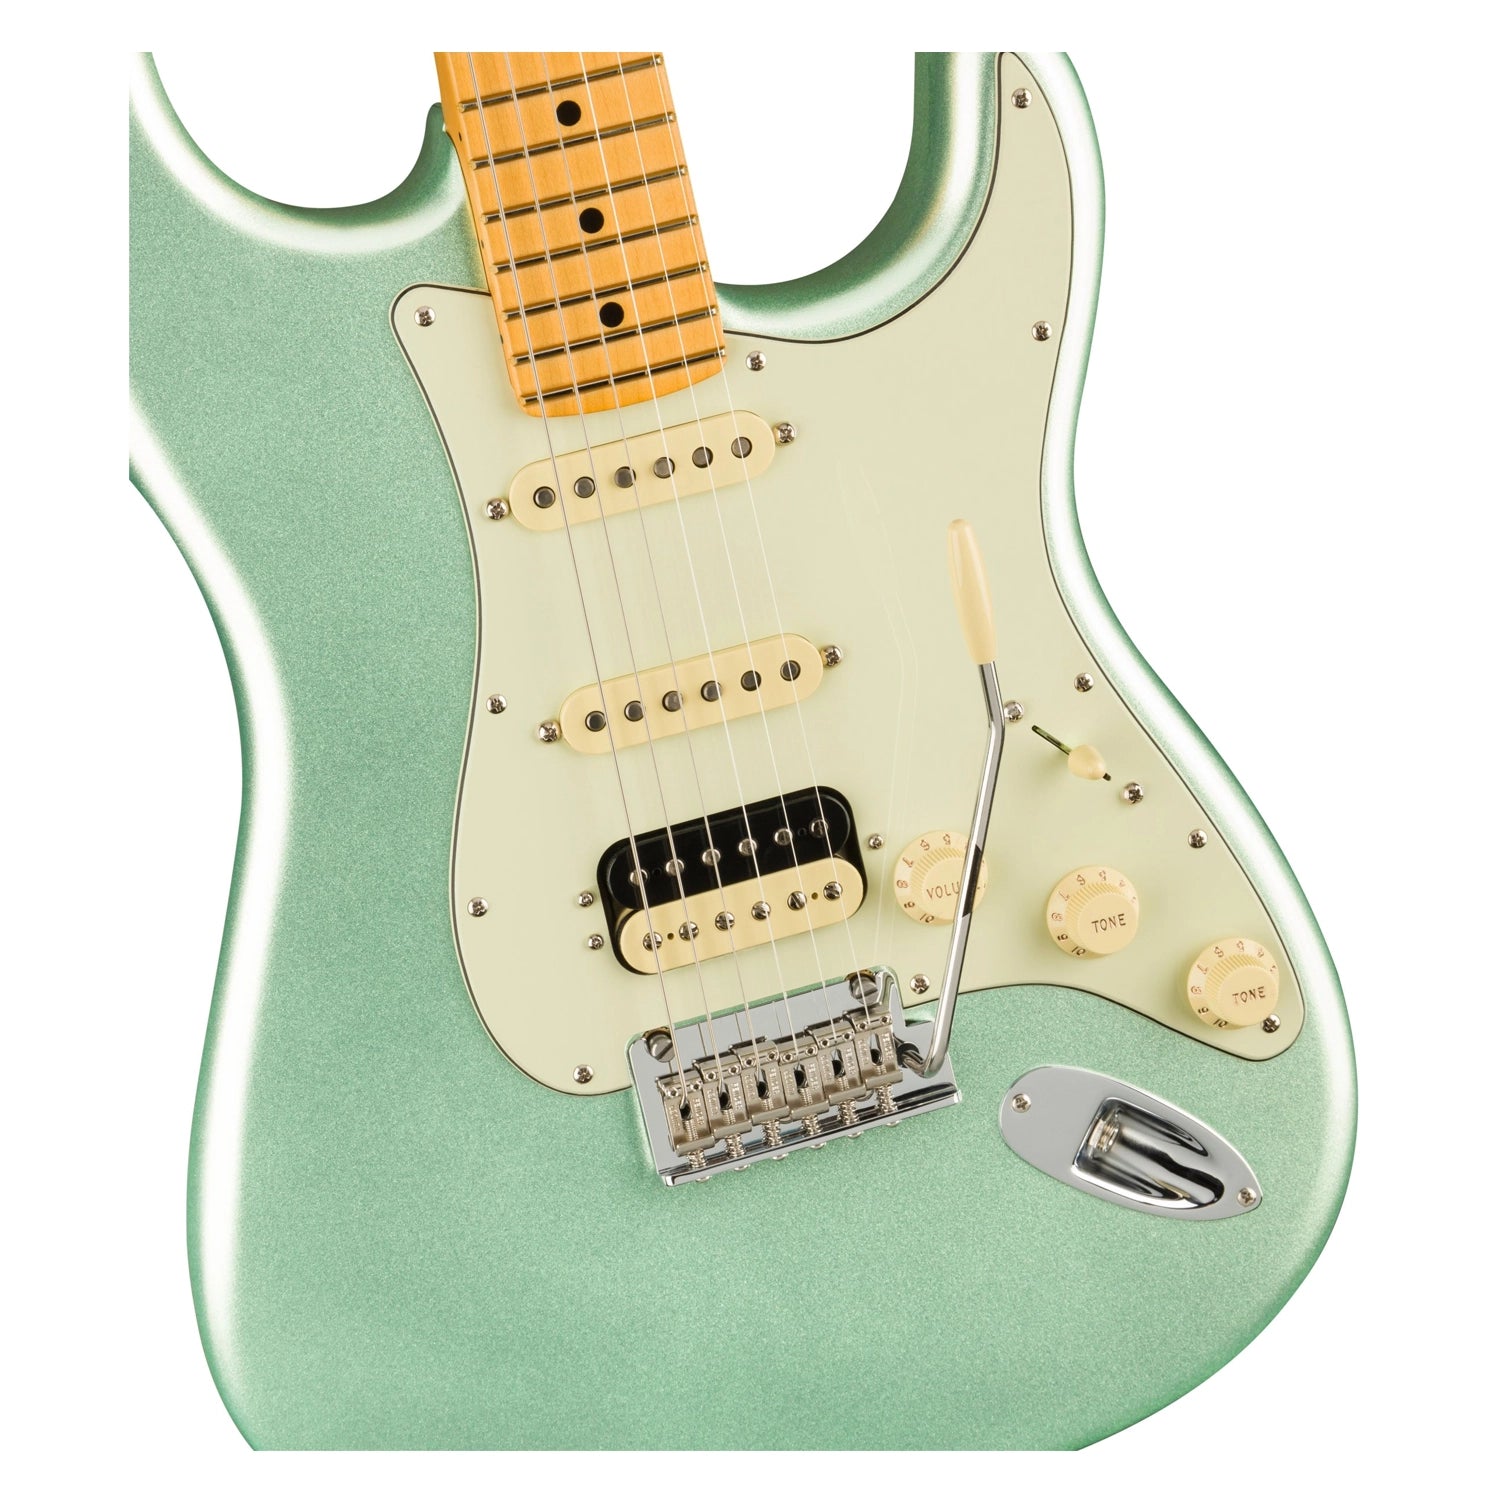 Fender American Professional II Stratocaster Hss Electric Guitar  - Mystic Surf Green